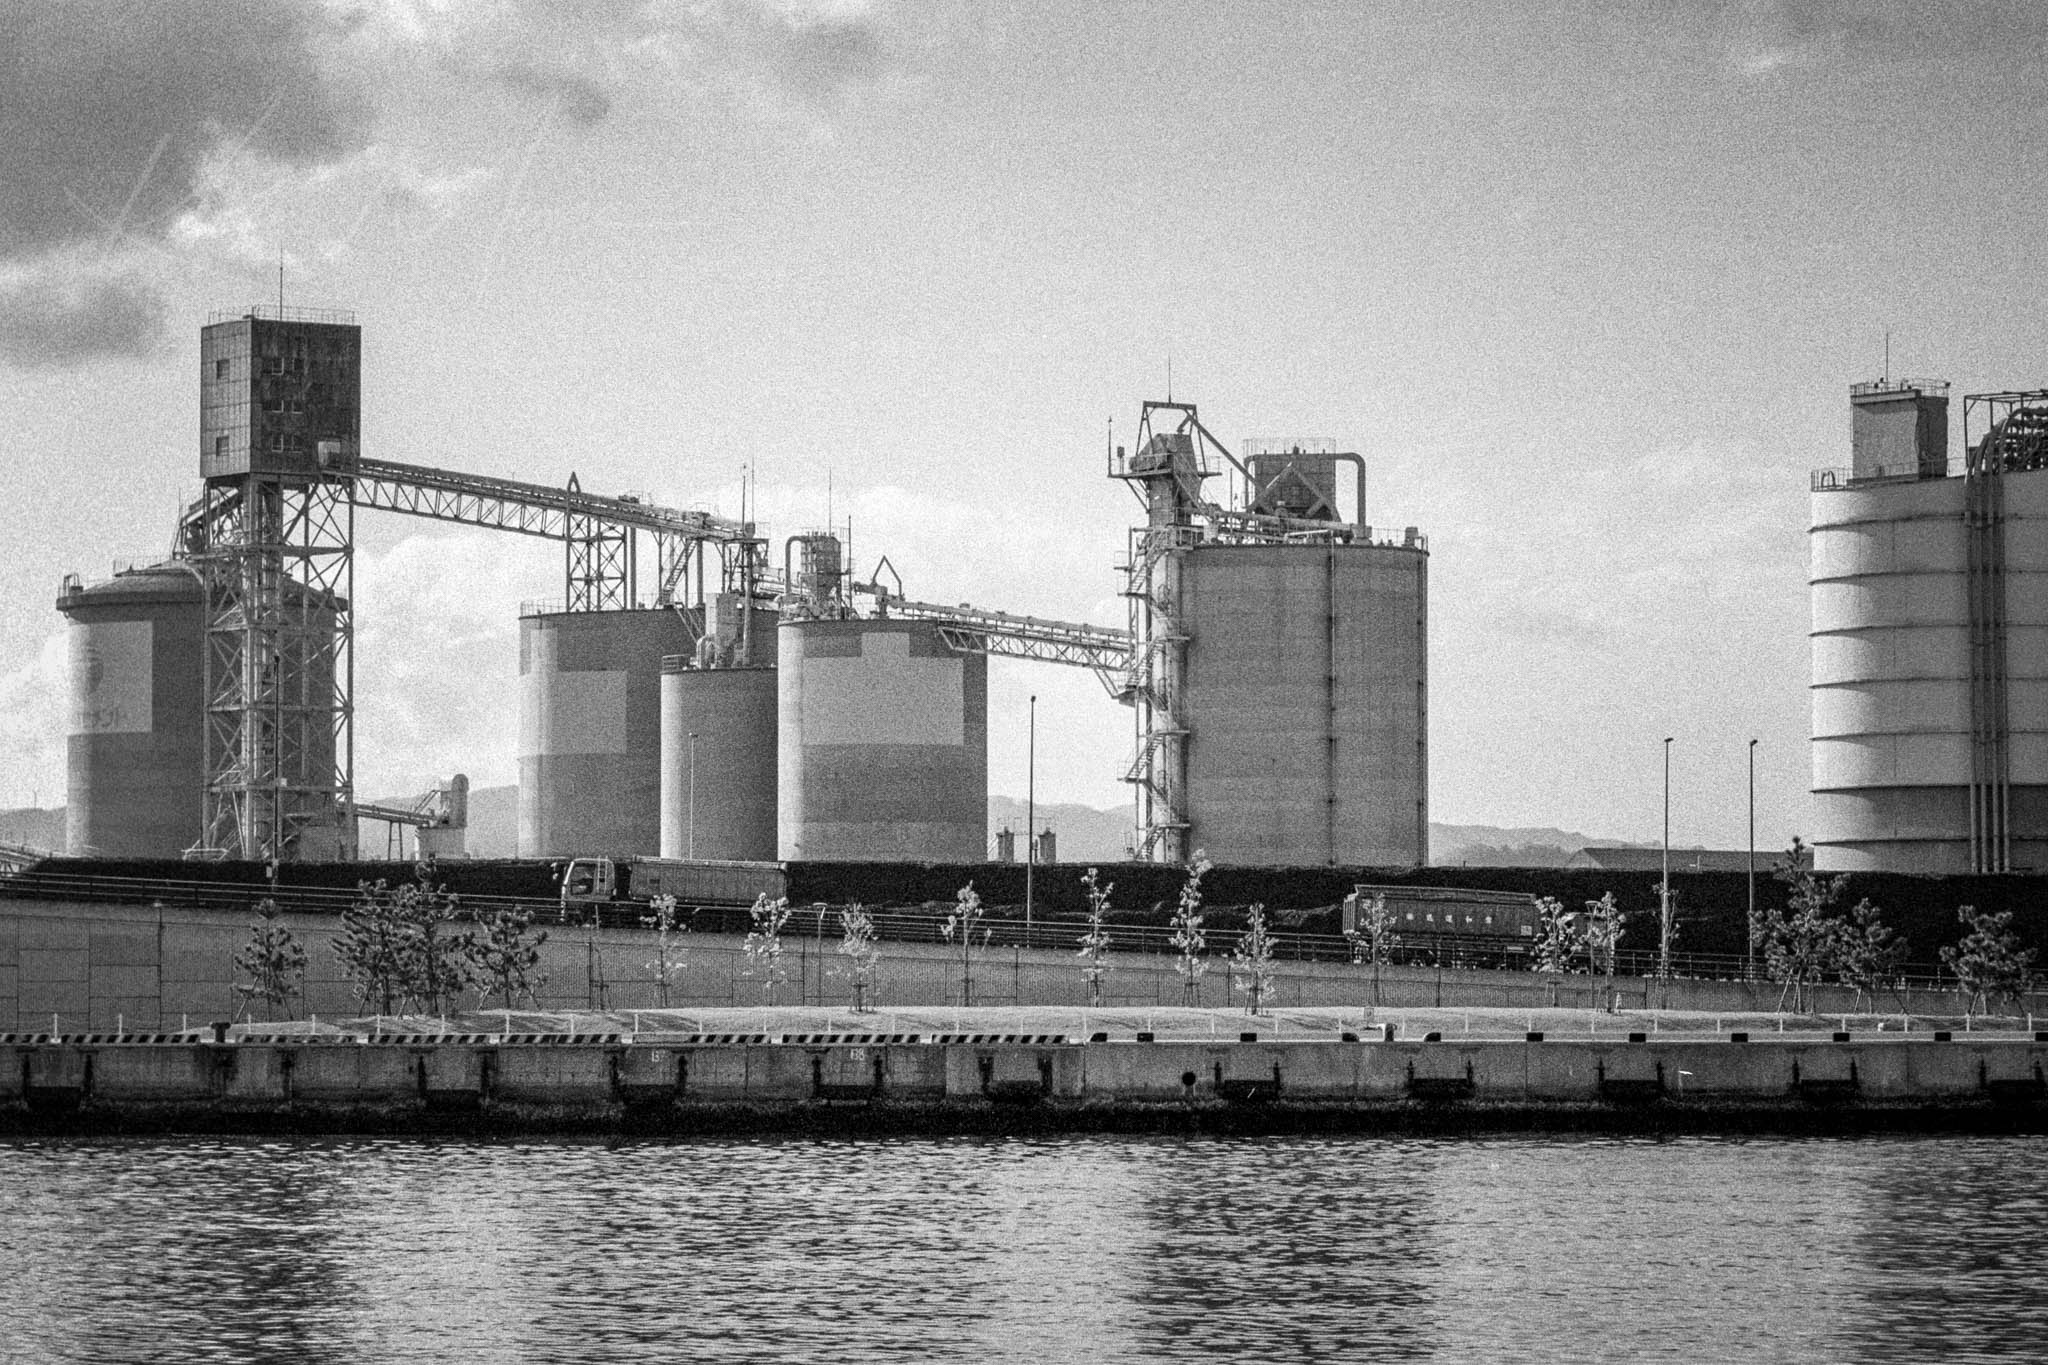 Riverside Factory with Industrial Silos and Docked Freight Train in Black and White